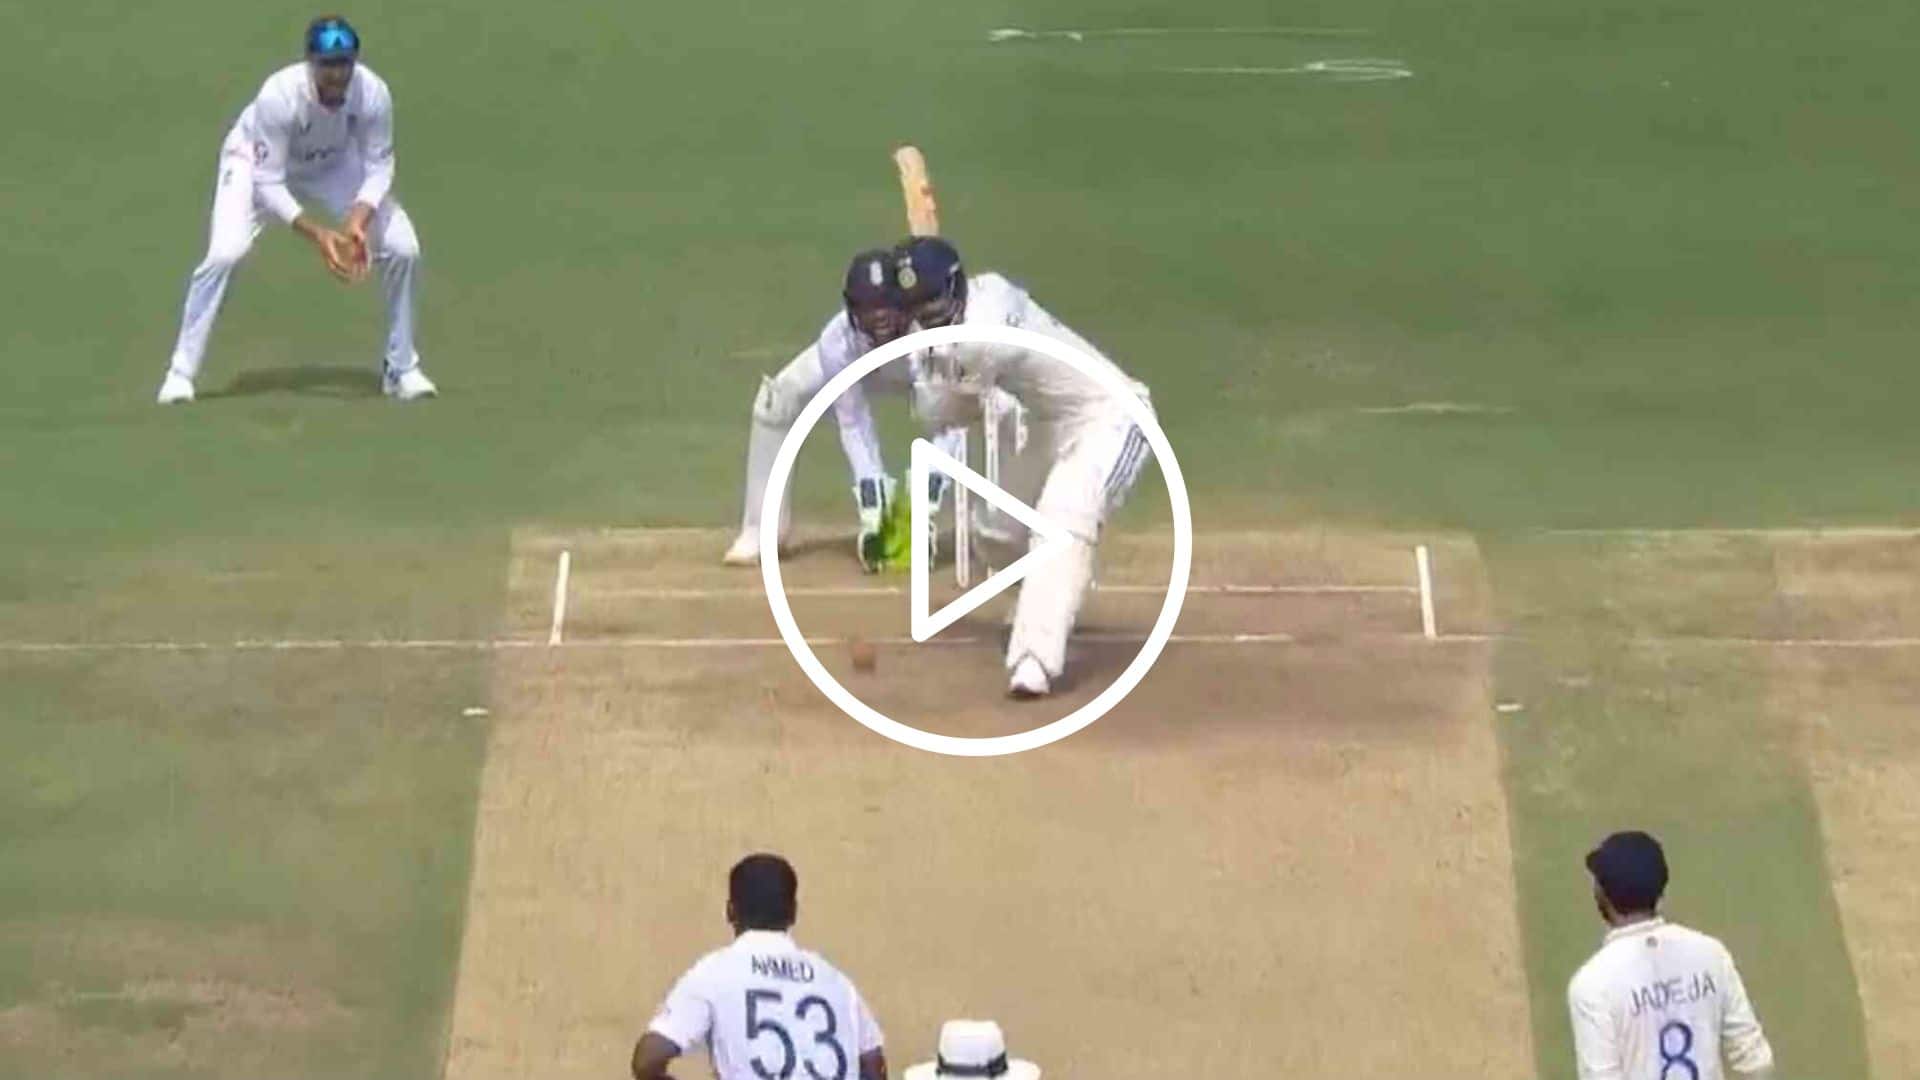 [Watch] KL Rahul's 'Stand & Deliver' Sixes In Single Over Brings Panic For Ben Stokes & Co.